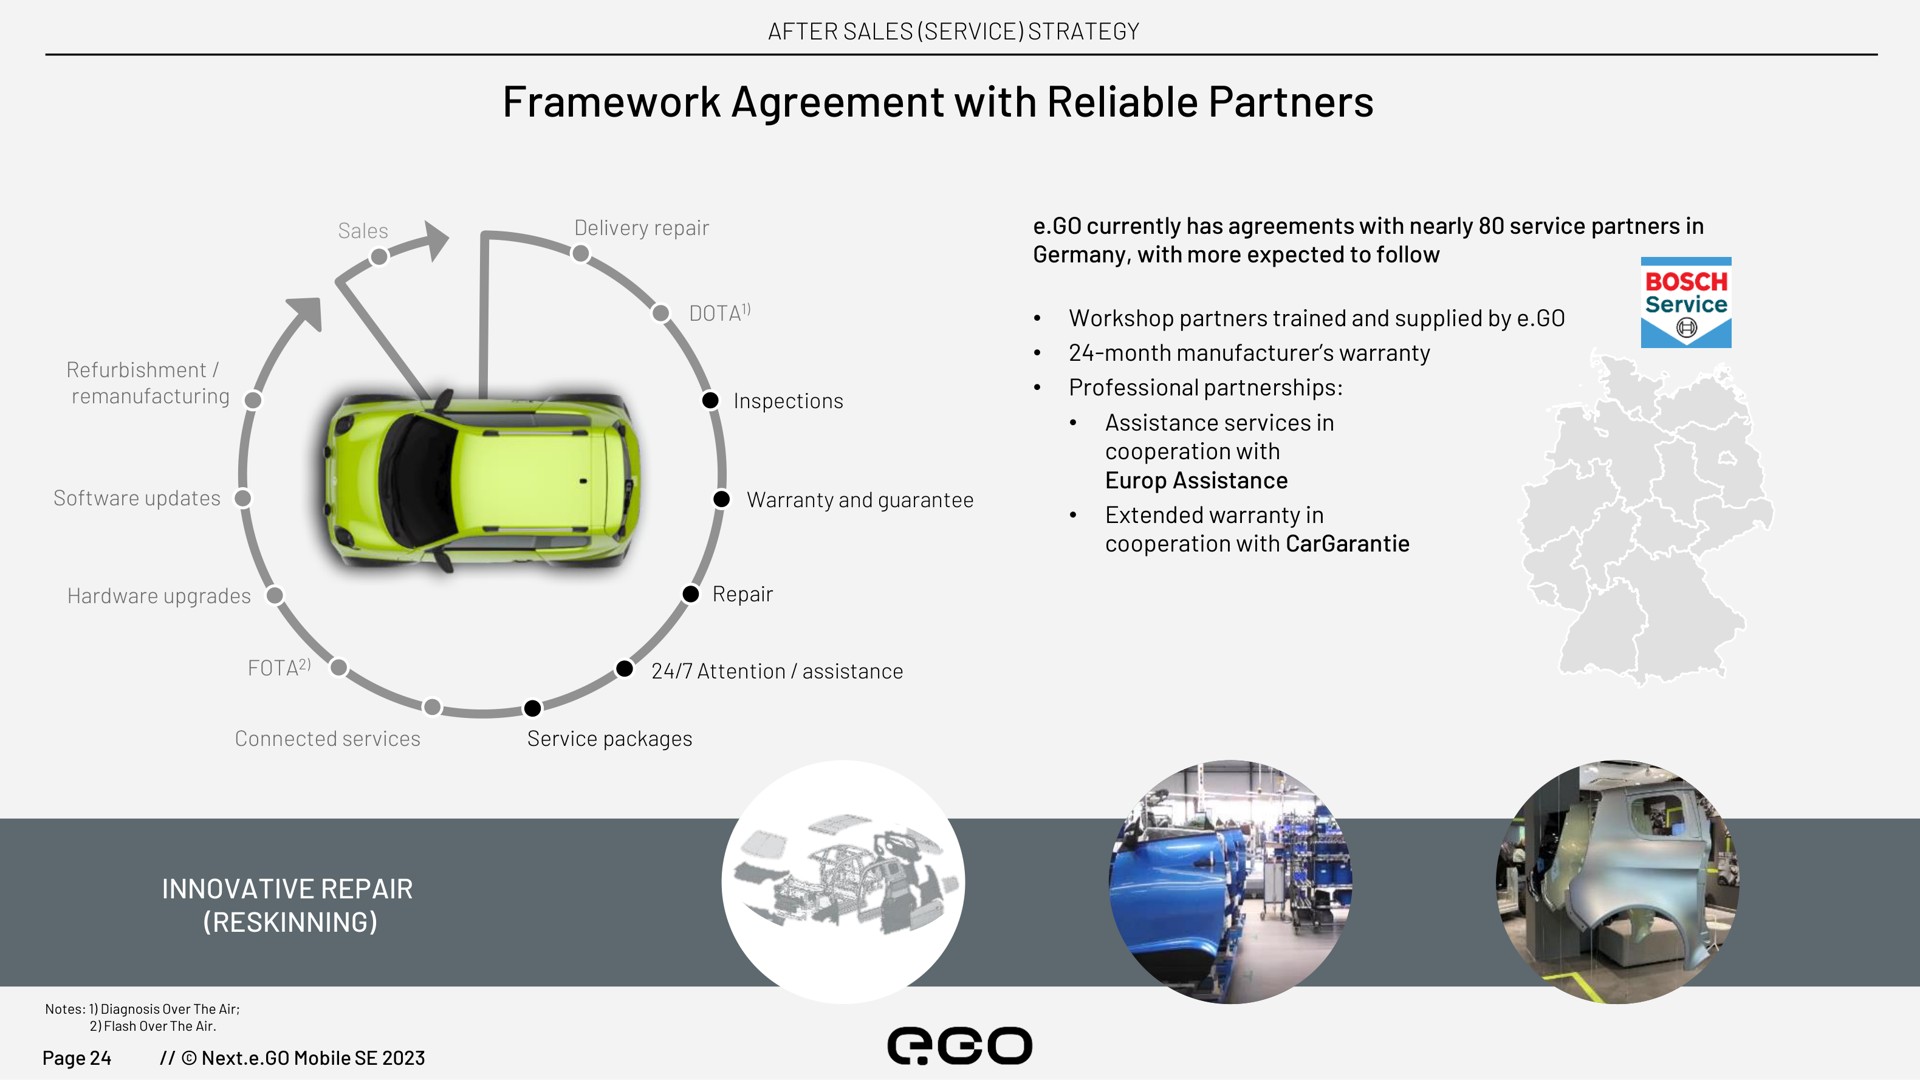 framework agreement with reliable partners bosch | Next.e.GO